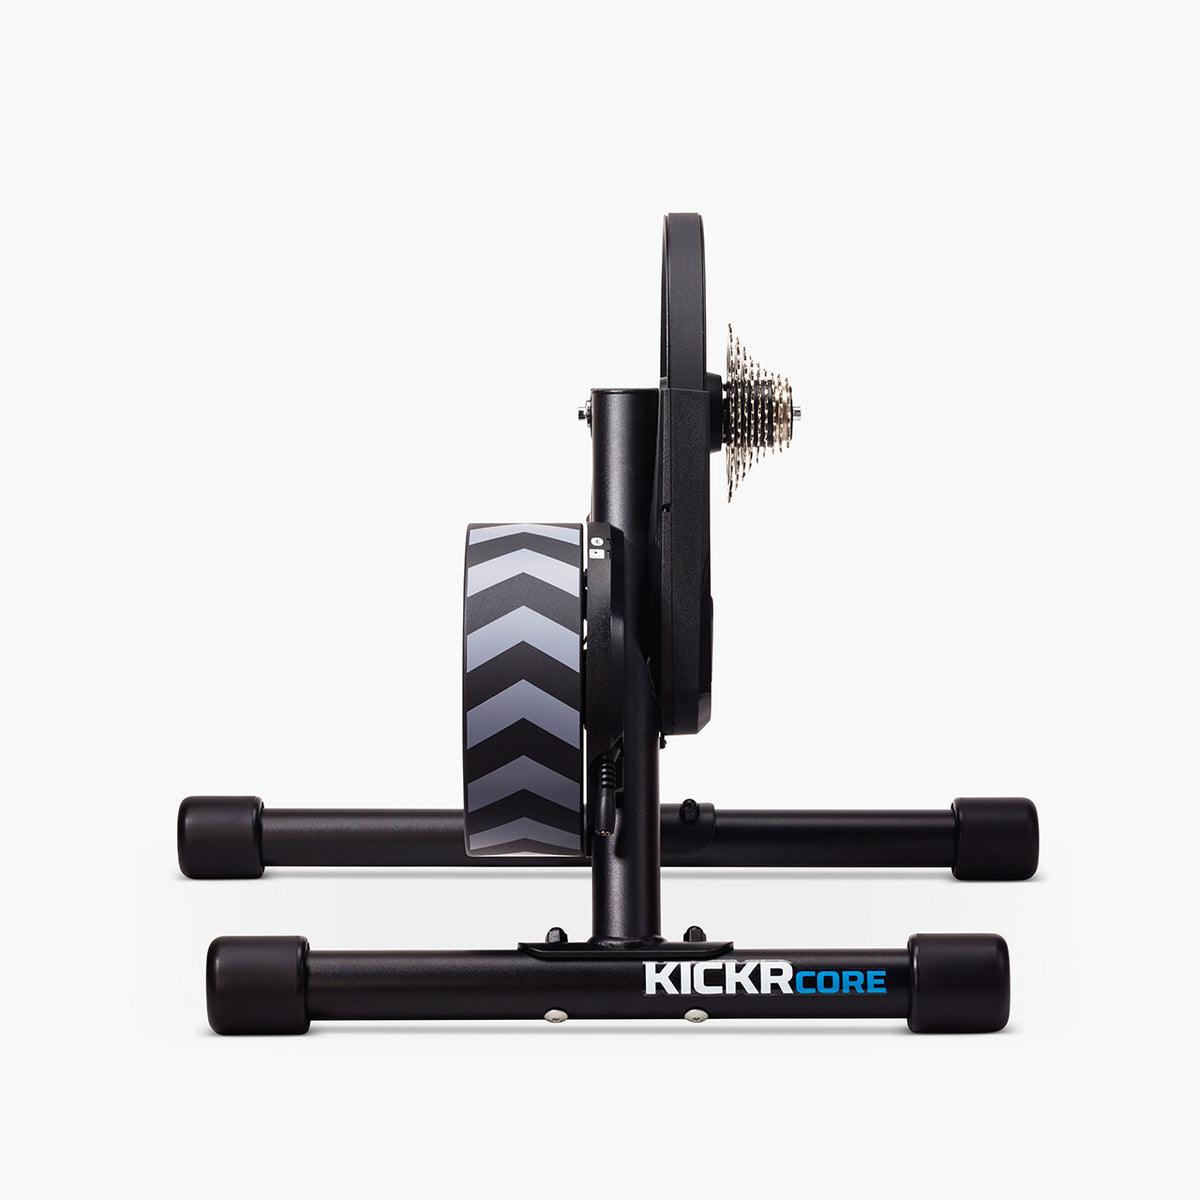 Wahoo KICKR CORE Zwift compatible with 9-speed cassette